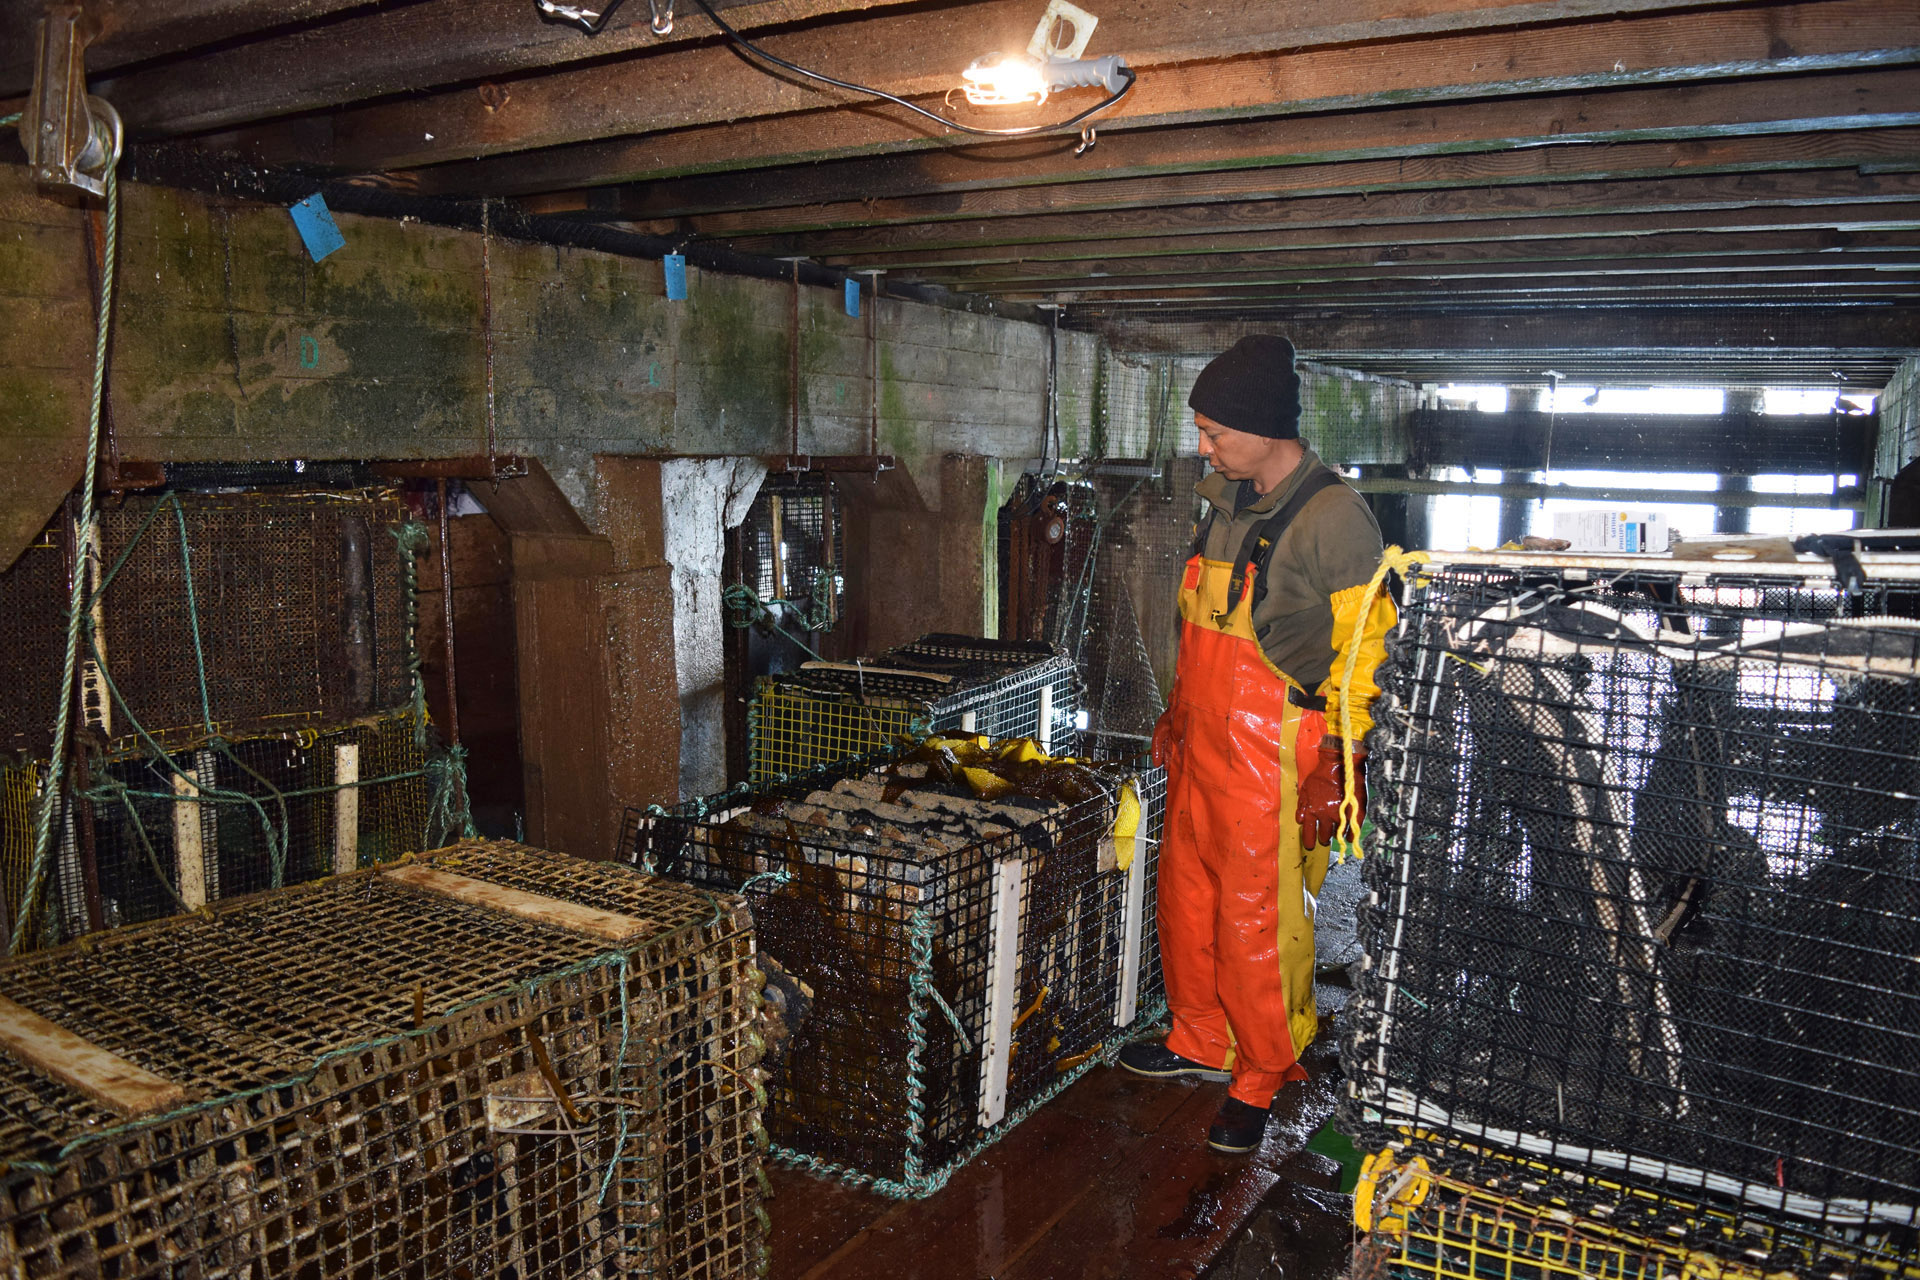 The sub-pier abalone farm at Monterey Abalone Company uses a system of ropes and pulleys to move the stacked, mollusk-filled cages in and out of the water.